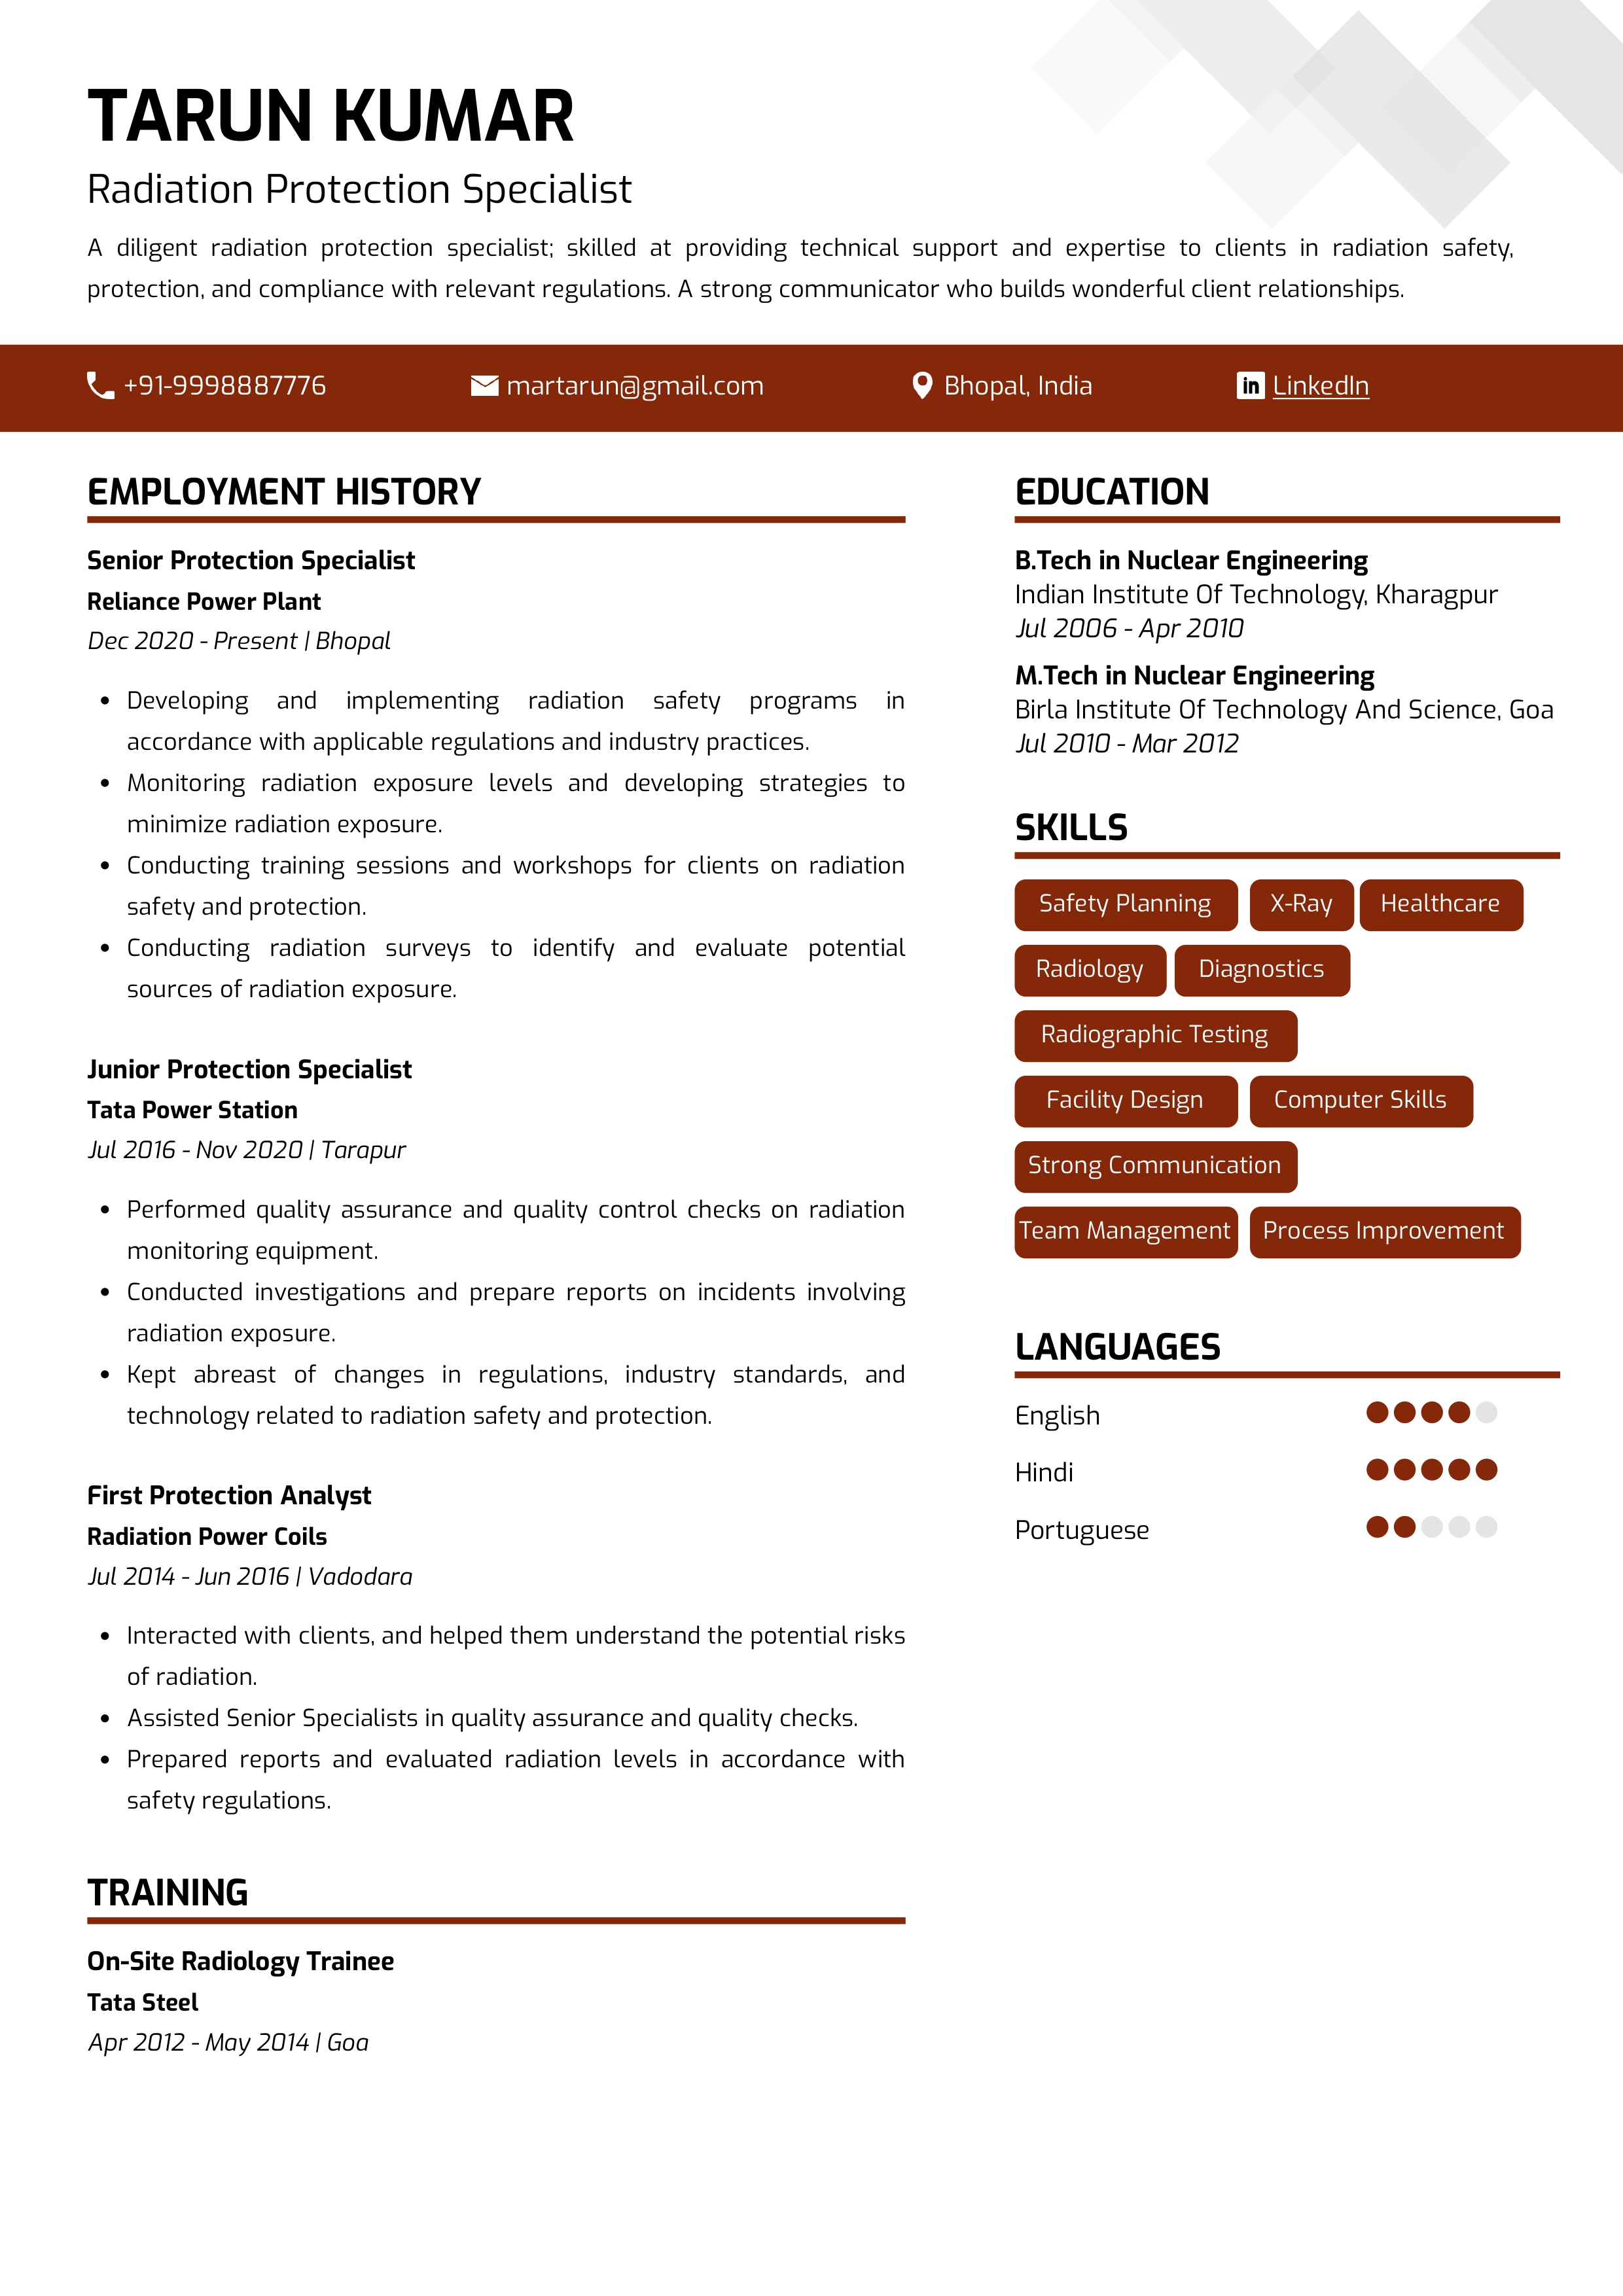 Sample Resume of Radiation Protection Specialist | Free Resume Templates & Samples on Resumod.co